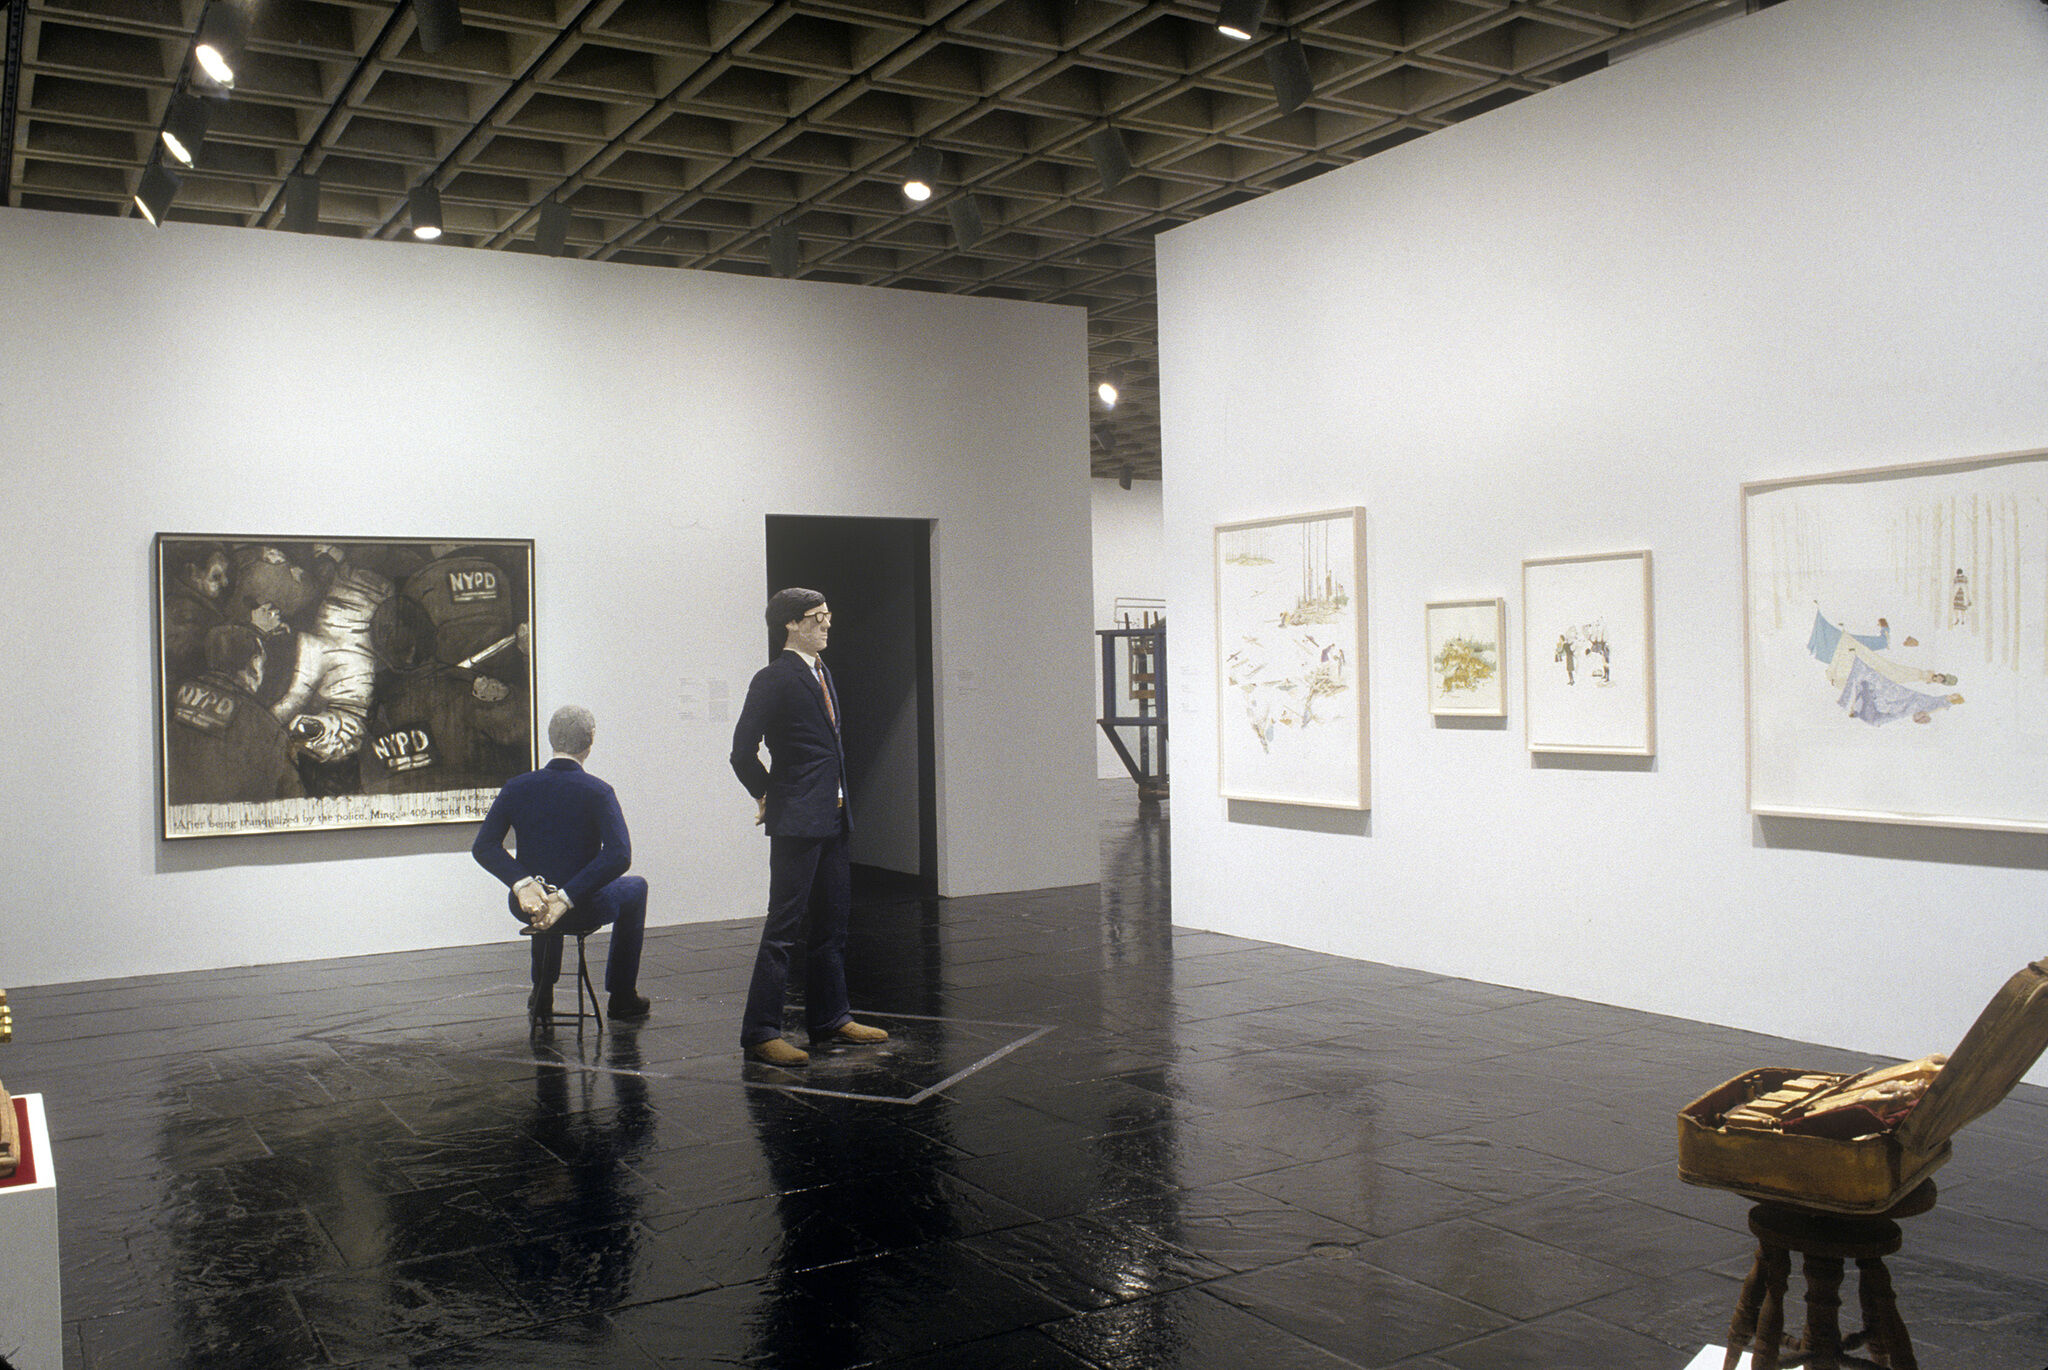 A gallery filled with prints and a sculpture of a man standing and another sculpture of a man sitting.